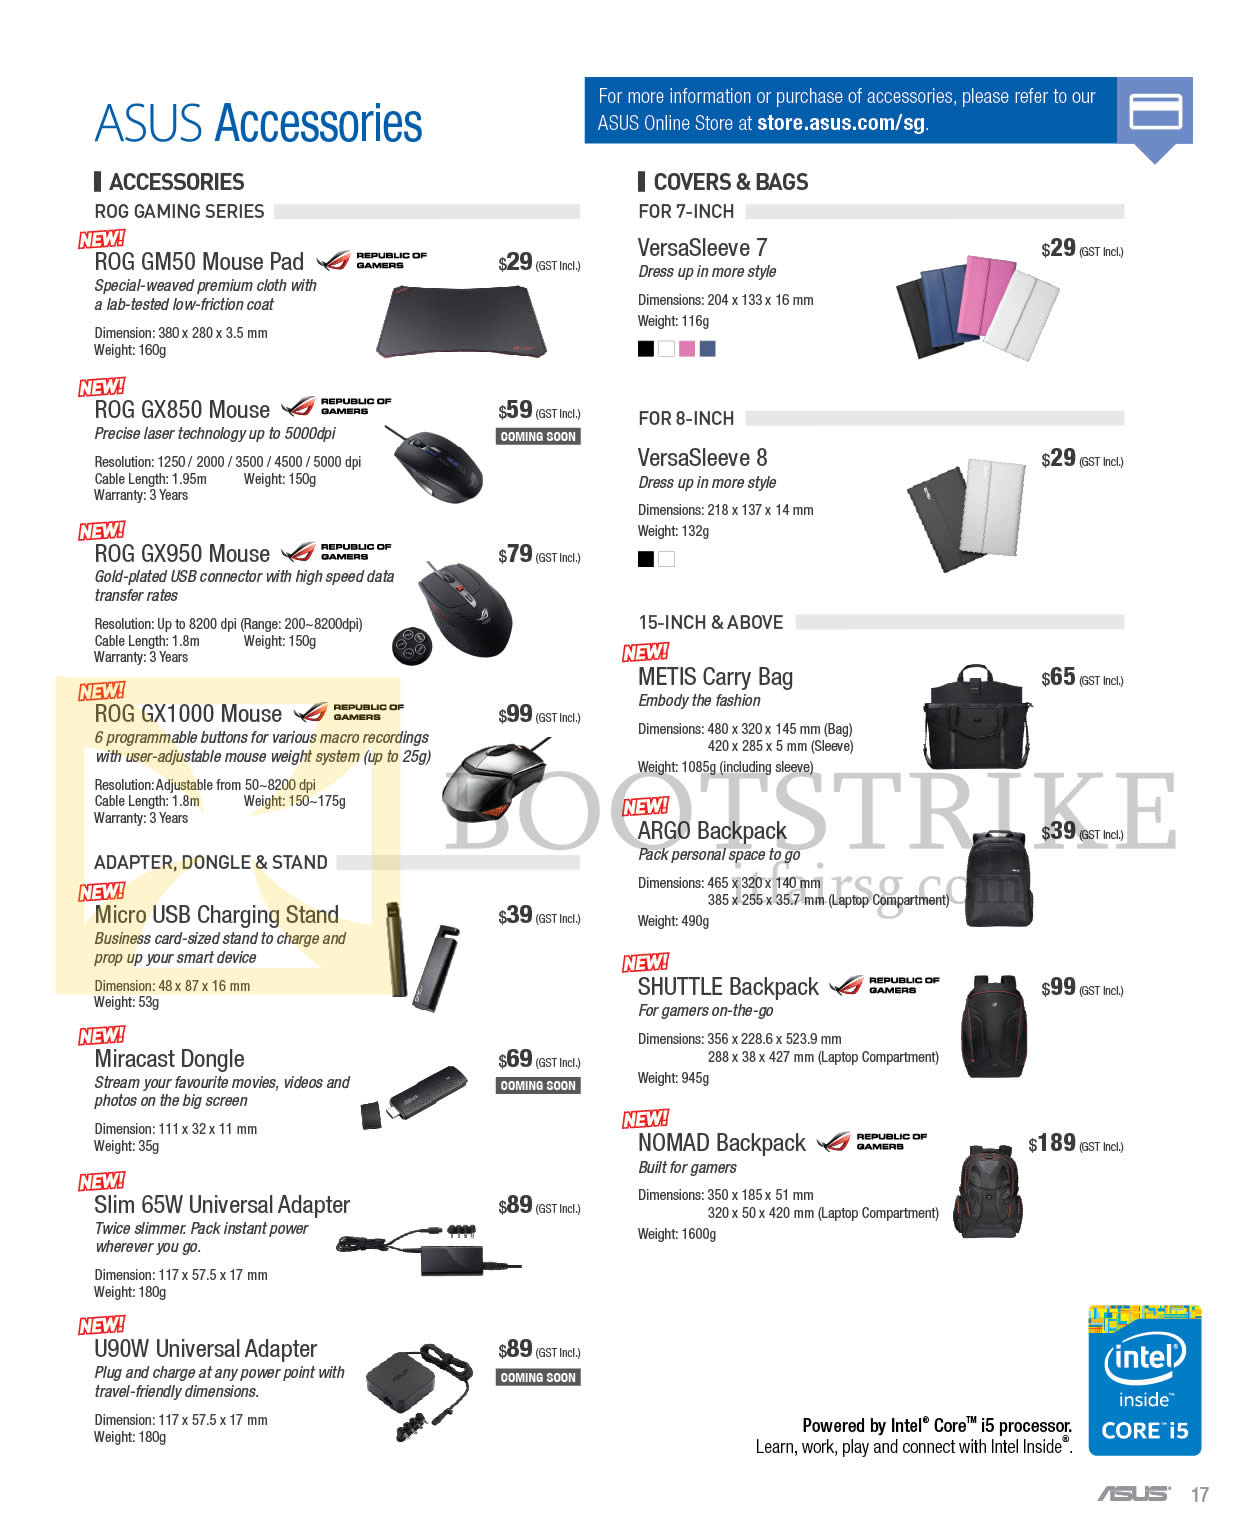 IT SHOW 2015 price list image brochure of ASUS Accessories Mouse Pads, Mouse, USB Charging Stand, Dongle, Adapters, Sleeves, Backpacks, Carry Bag